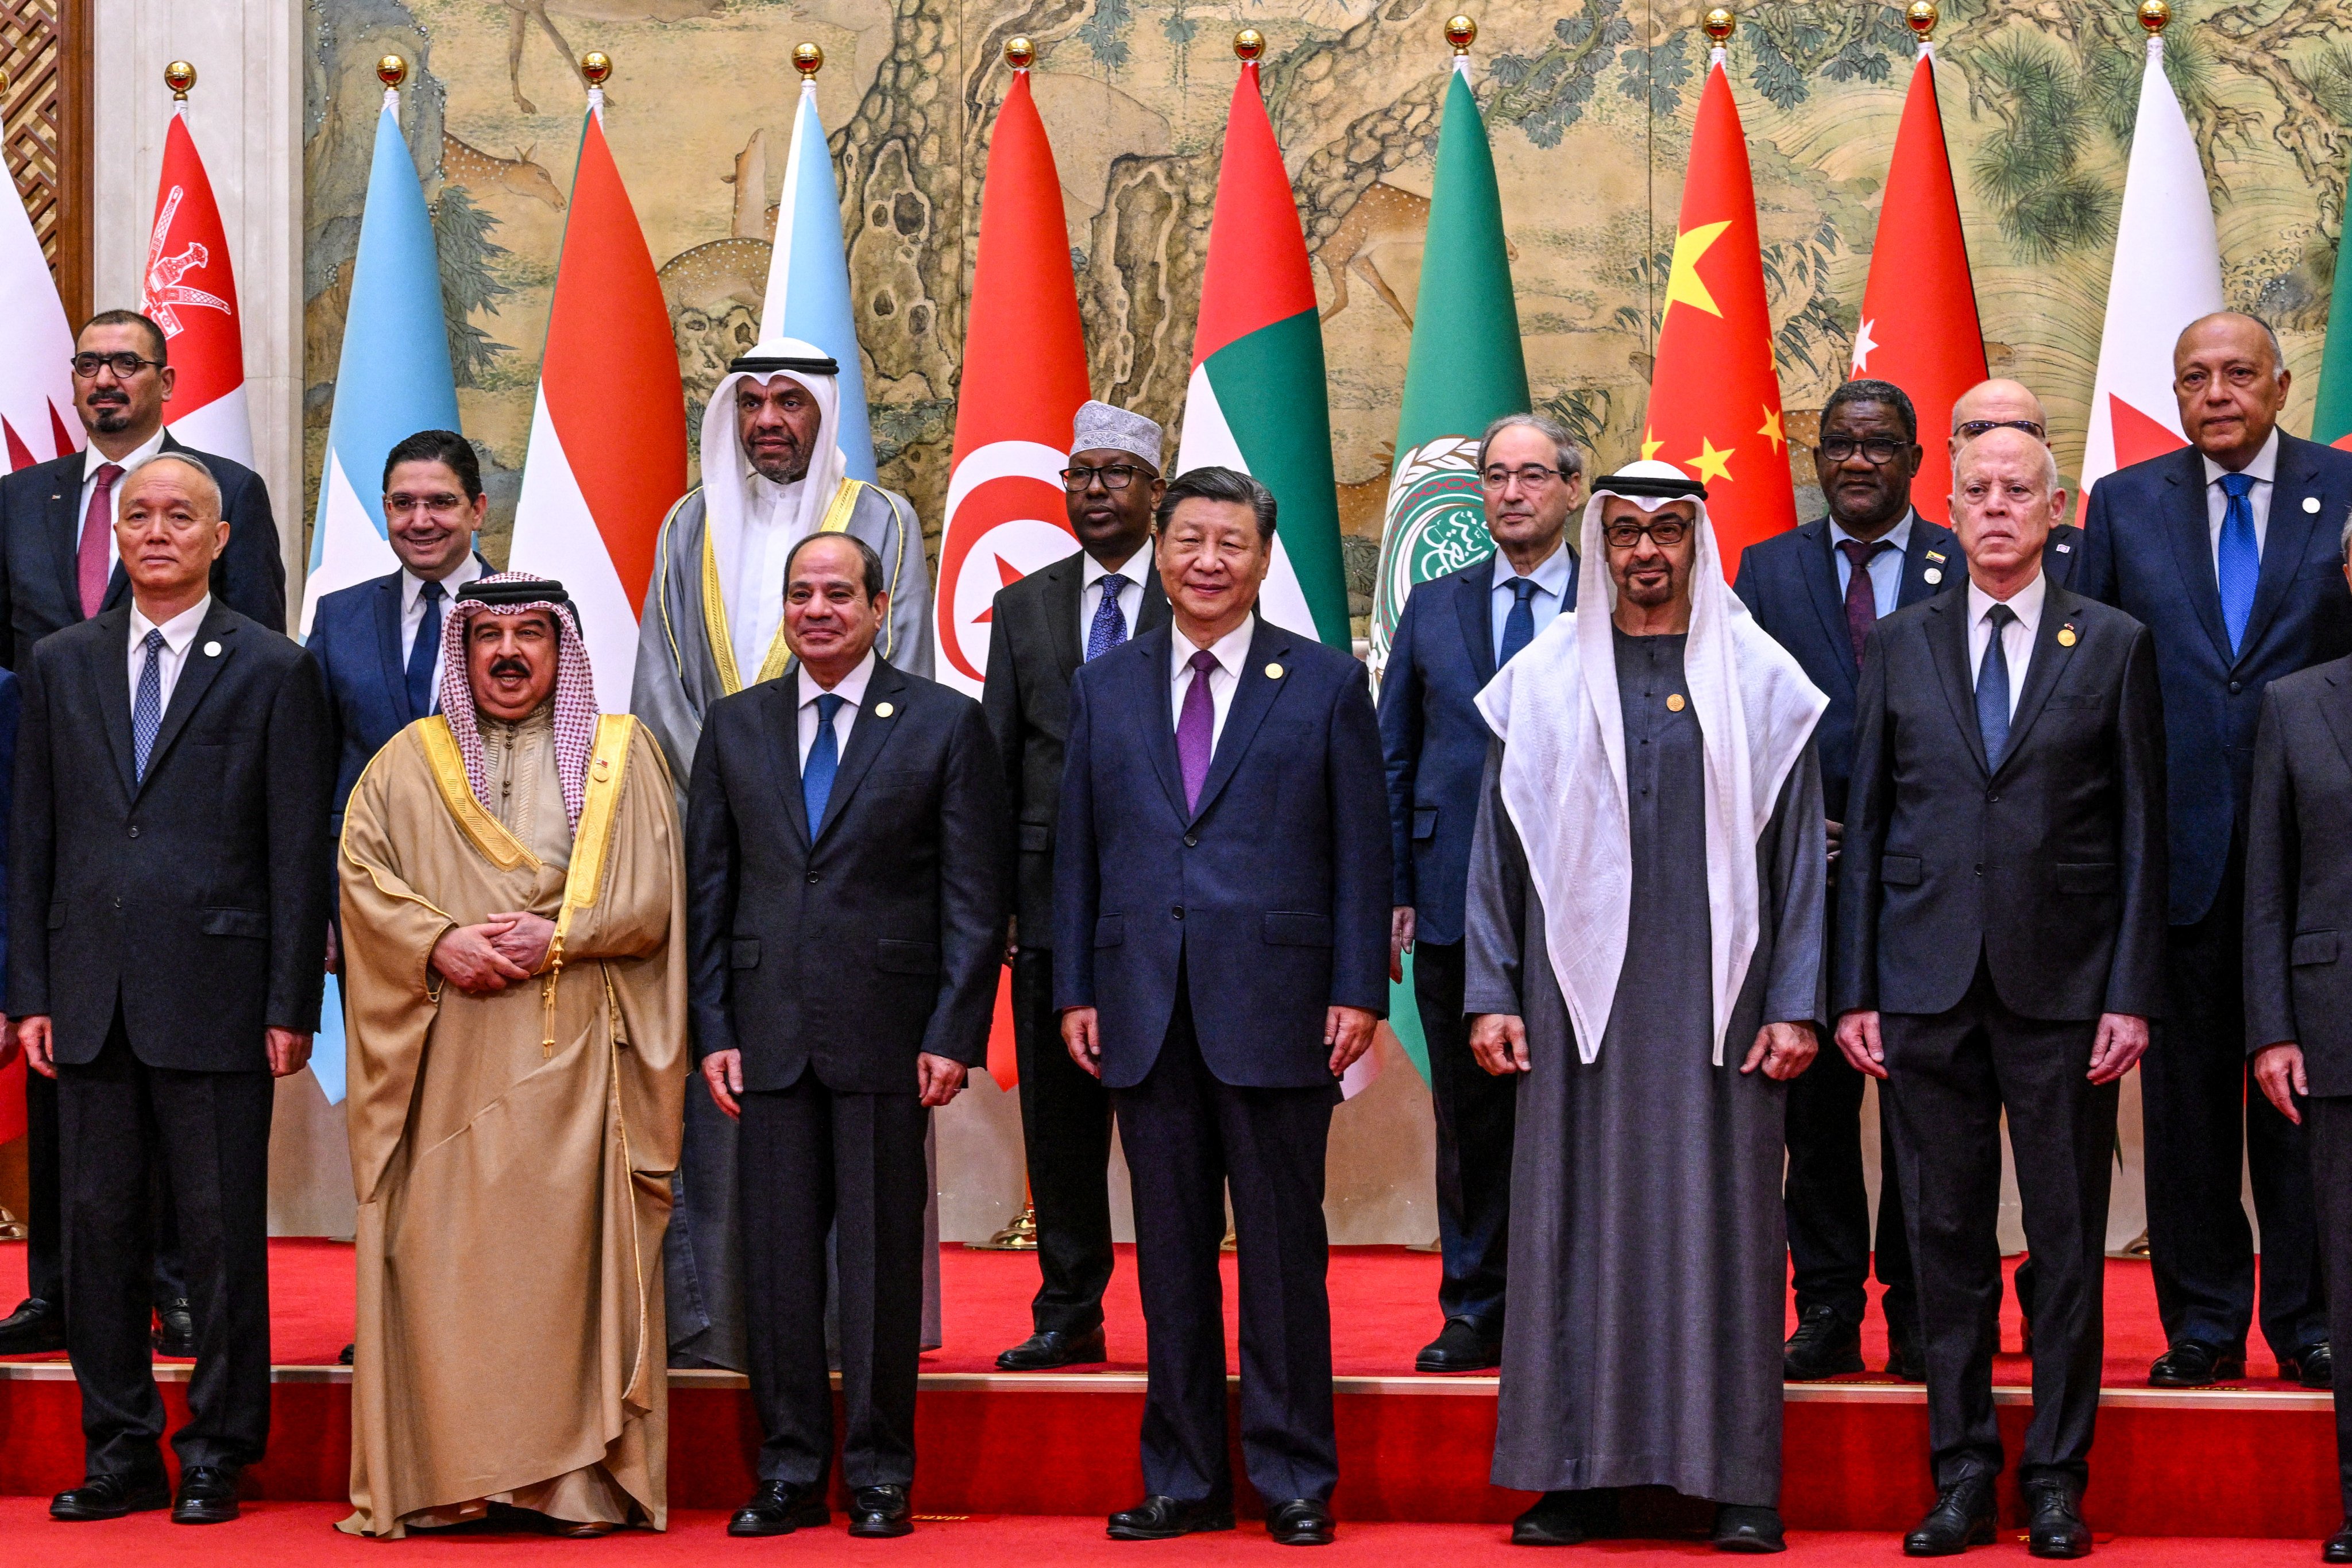 China’s President Xi Jinping appears for a group photo with Arab leaders at the 10th ministerial meeting of the China-Arab States Cooperation Forum in Beijing on Thursday. China is seeking to strengthen relations with Arab states as a model for maintaining world peace and stability, Xi was quoted as saying by state media at the gathering. Photo: Reuters